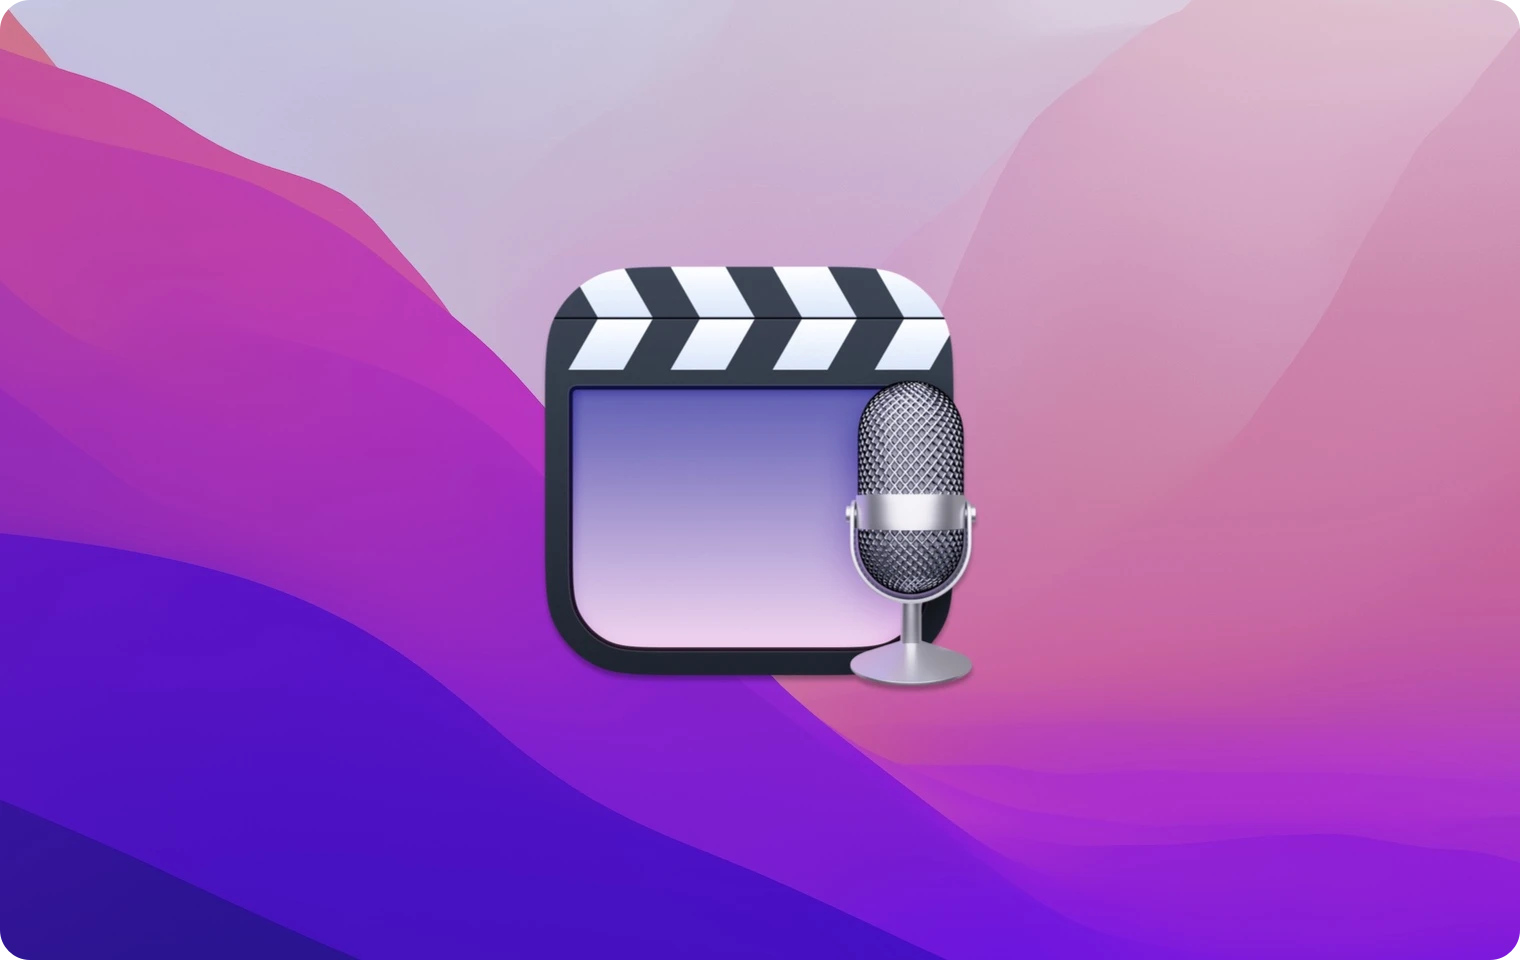 Claquette icon on macOS Monterey background